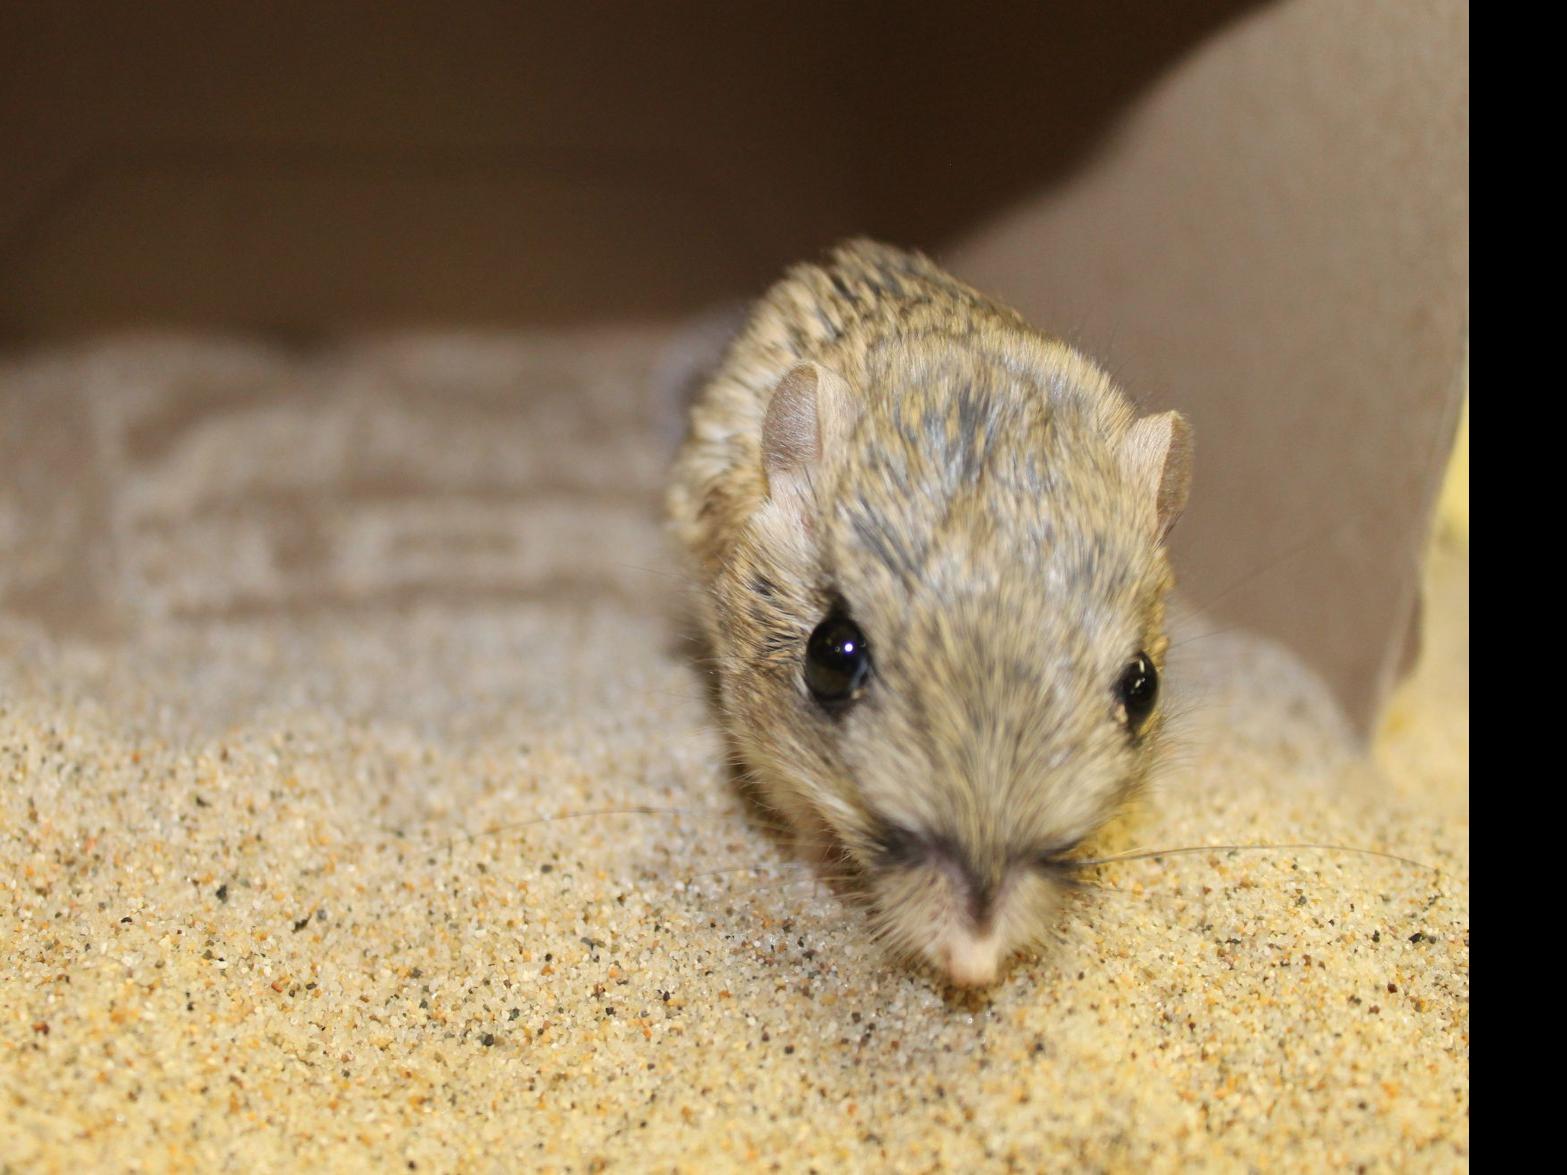 Texas kangaroo rat species is closer to being named an endangered